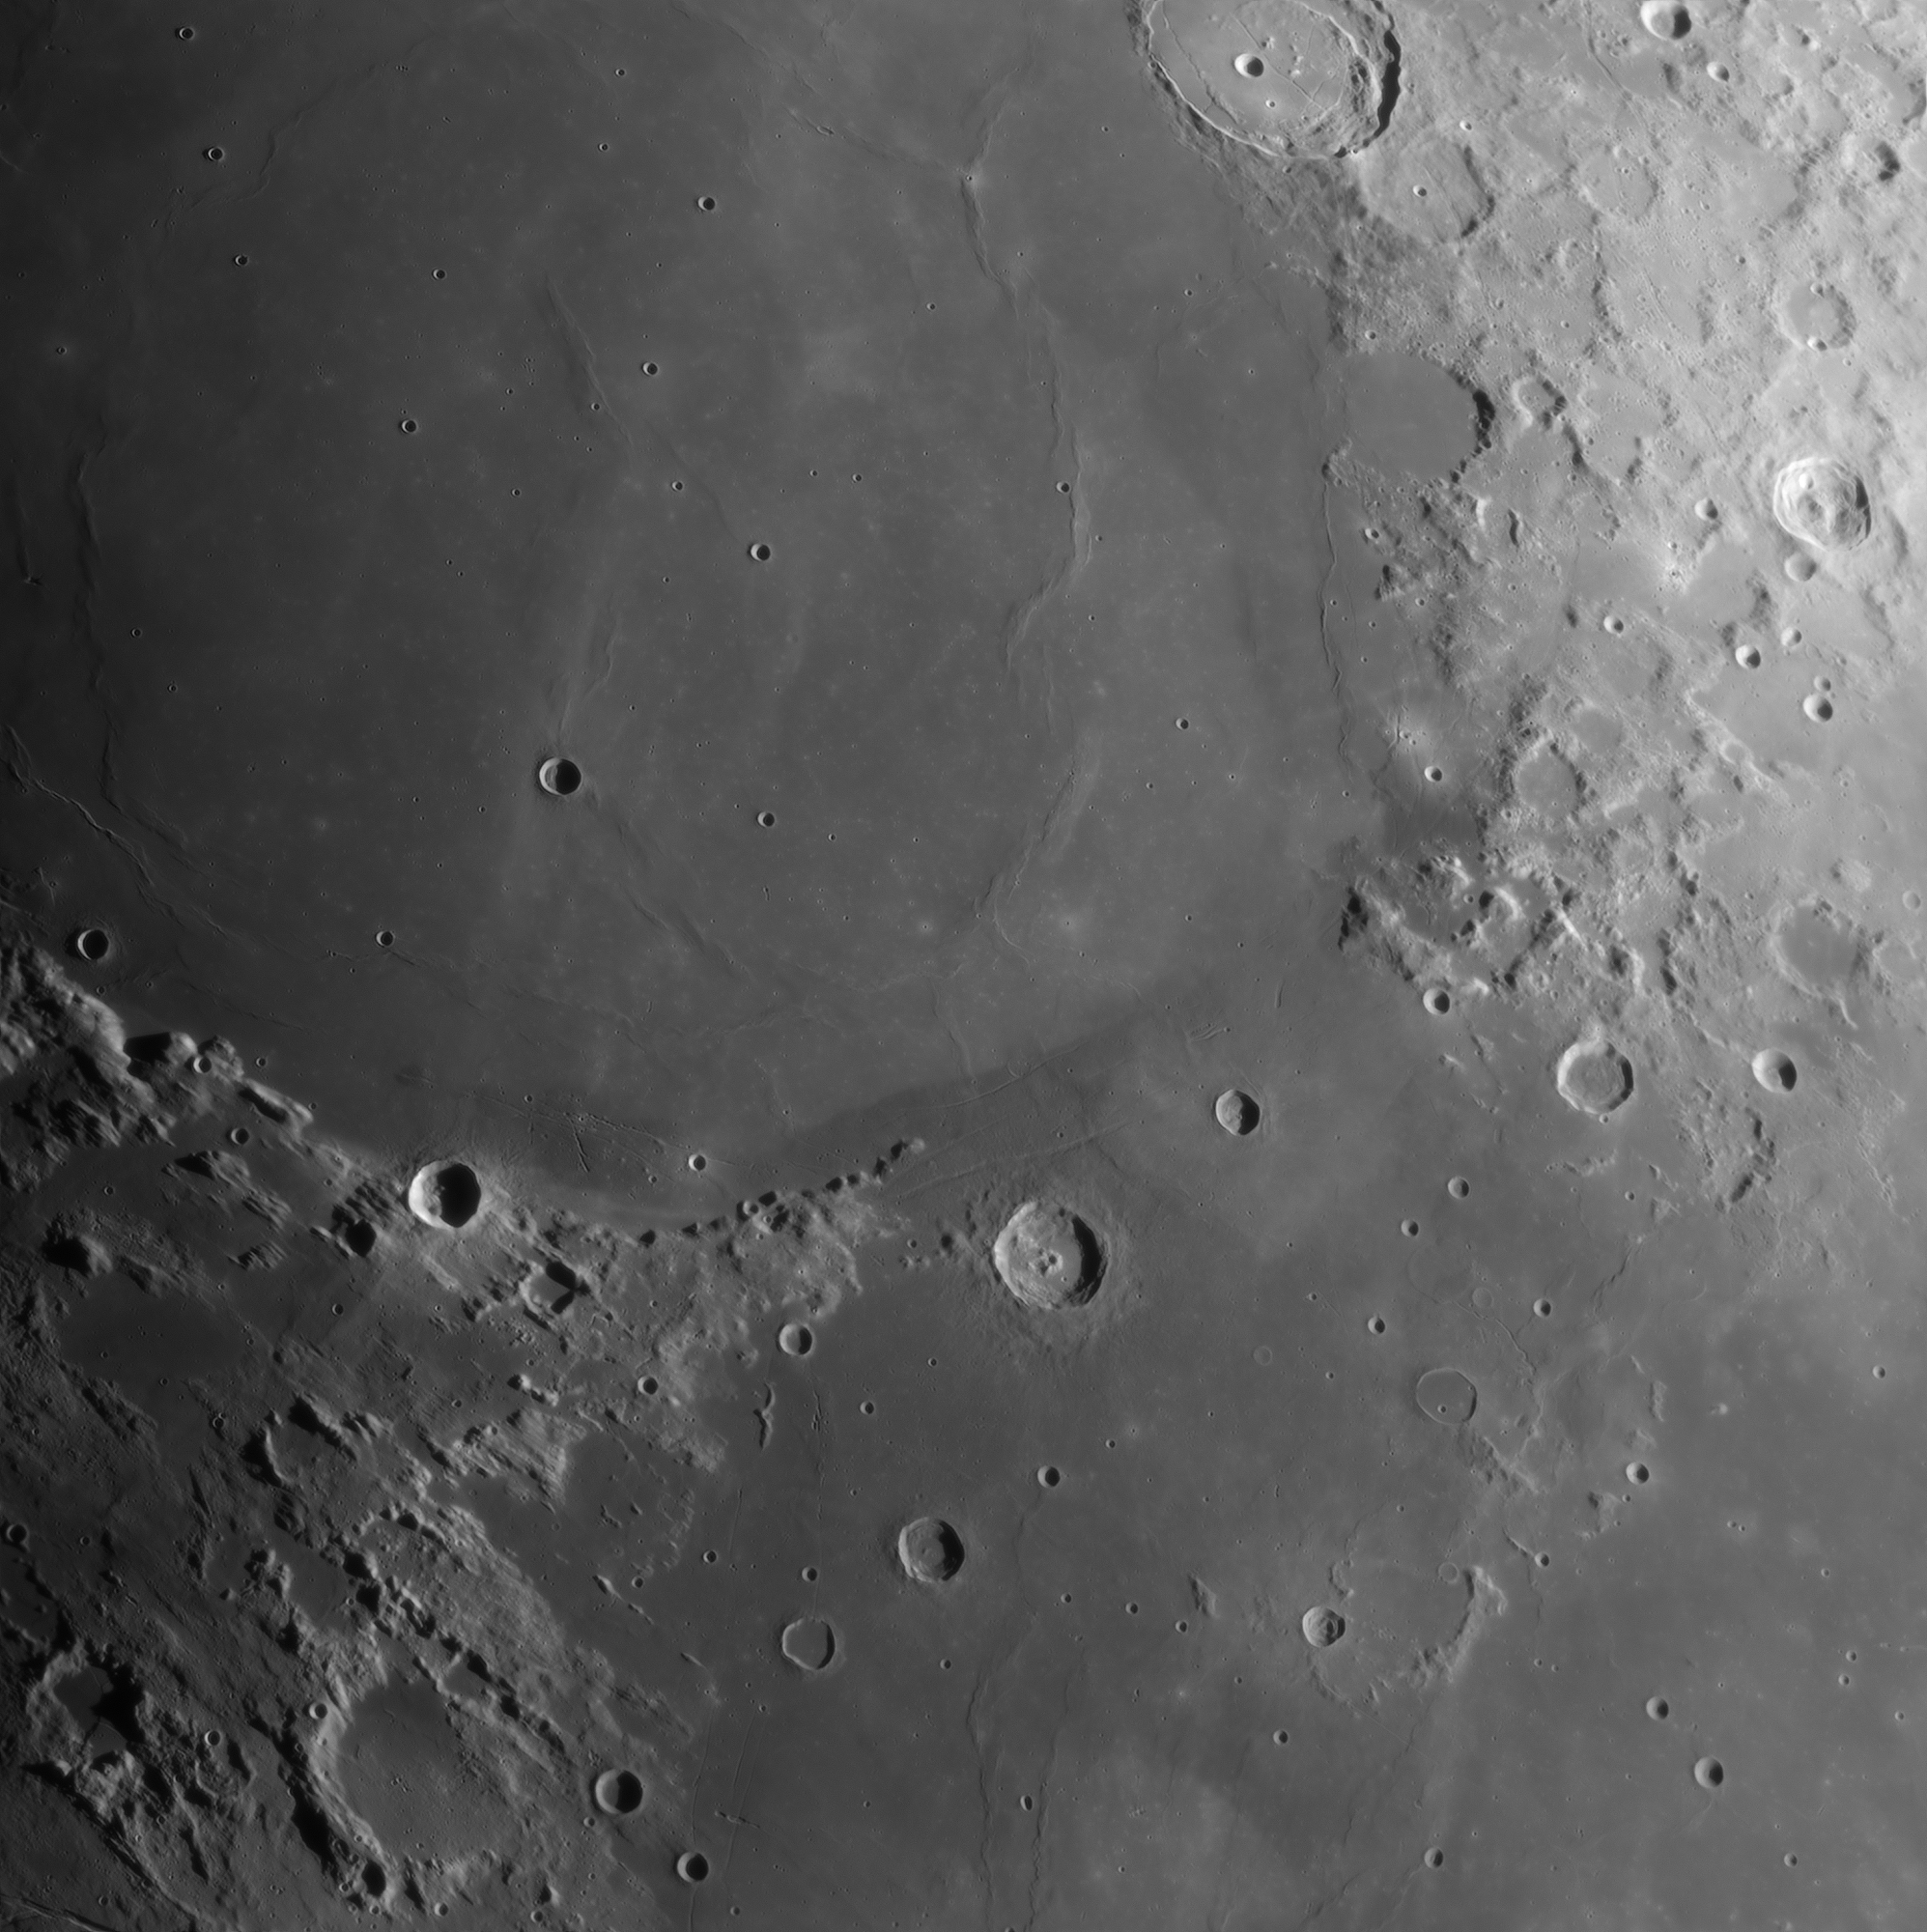 65d0dfd6b59f1_de_la_mer_de_la_srnit__la_mer_de_la_tranquilit__du_2024-02-16-1748_8-U-R-Moon_l3_ap4074.thumb.png.a618c017f075420a6e6450b85561559b.png